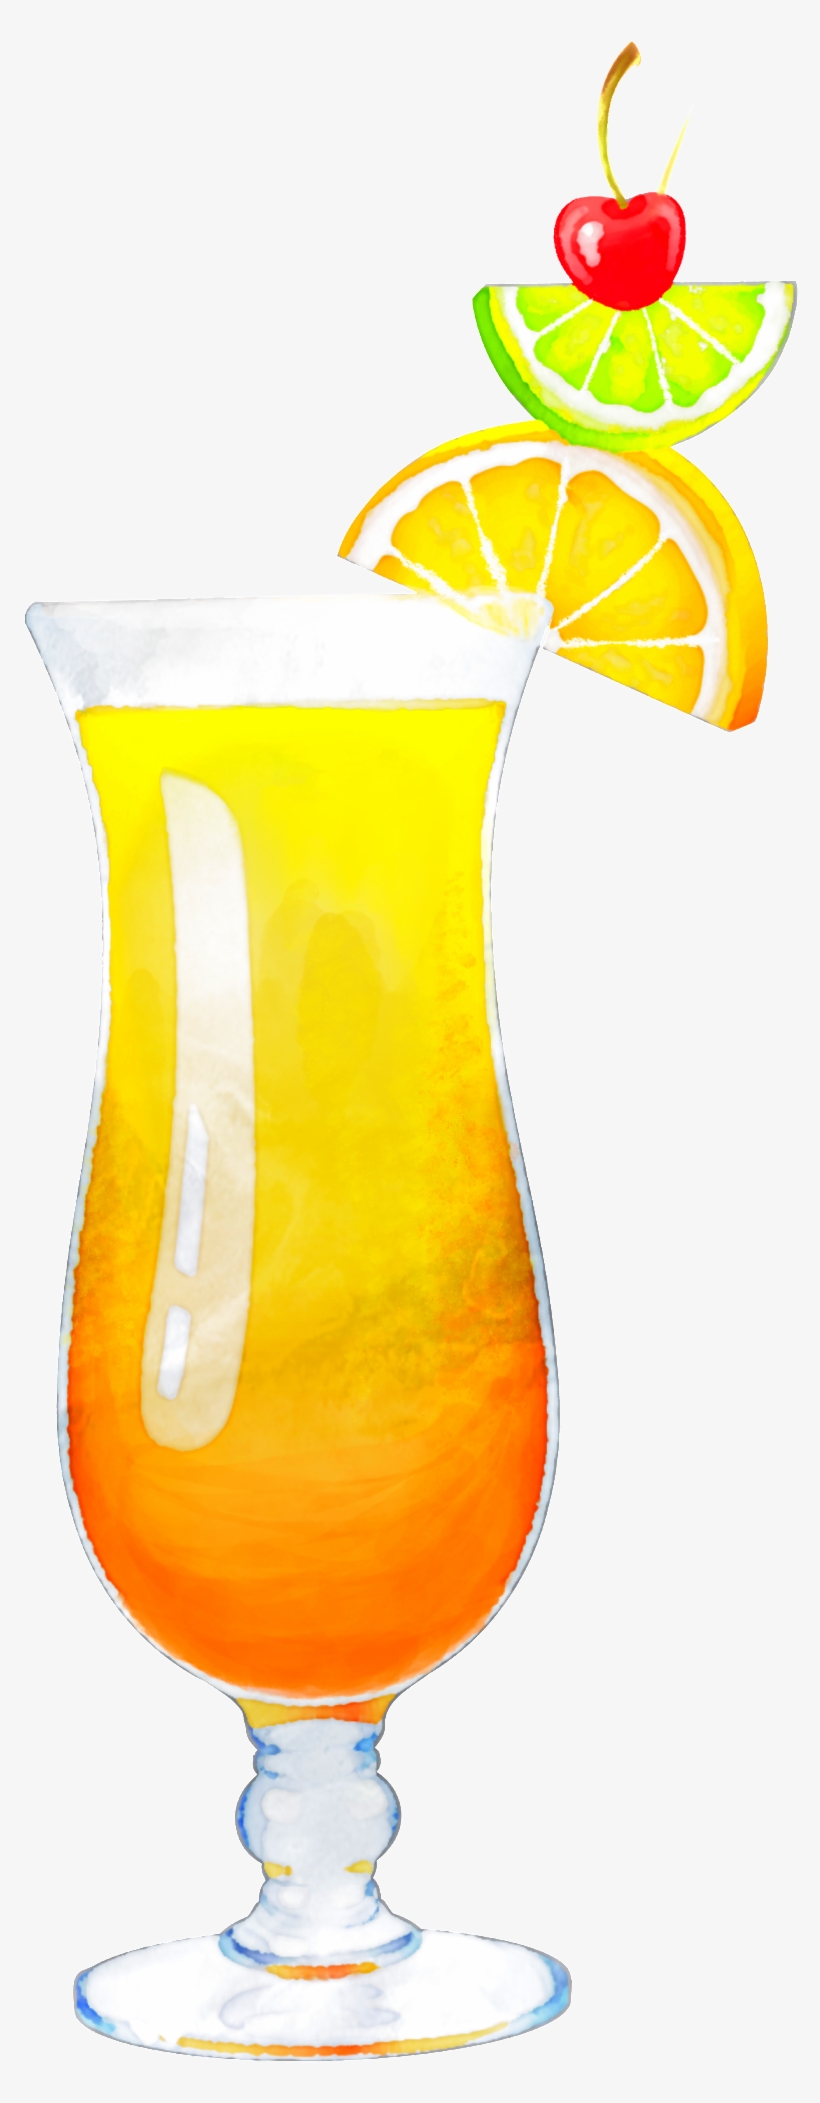 Hand Painted A Glass Of Orange Juice Png Transparent - Png Sex On The Beach, transparent png #2495153